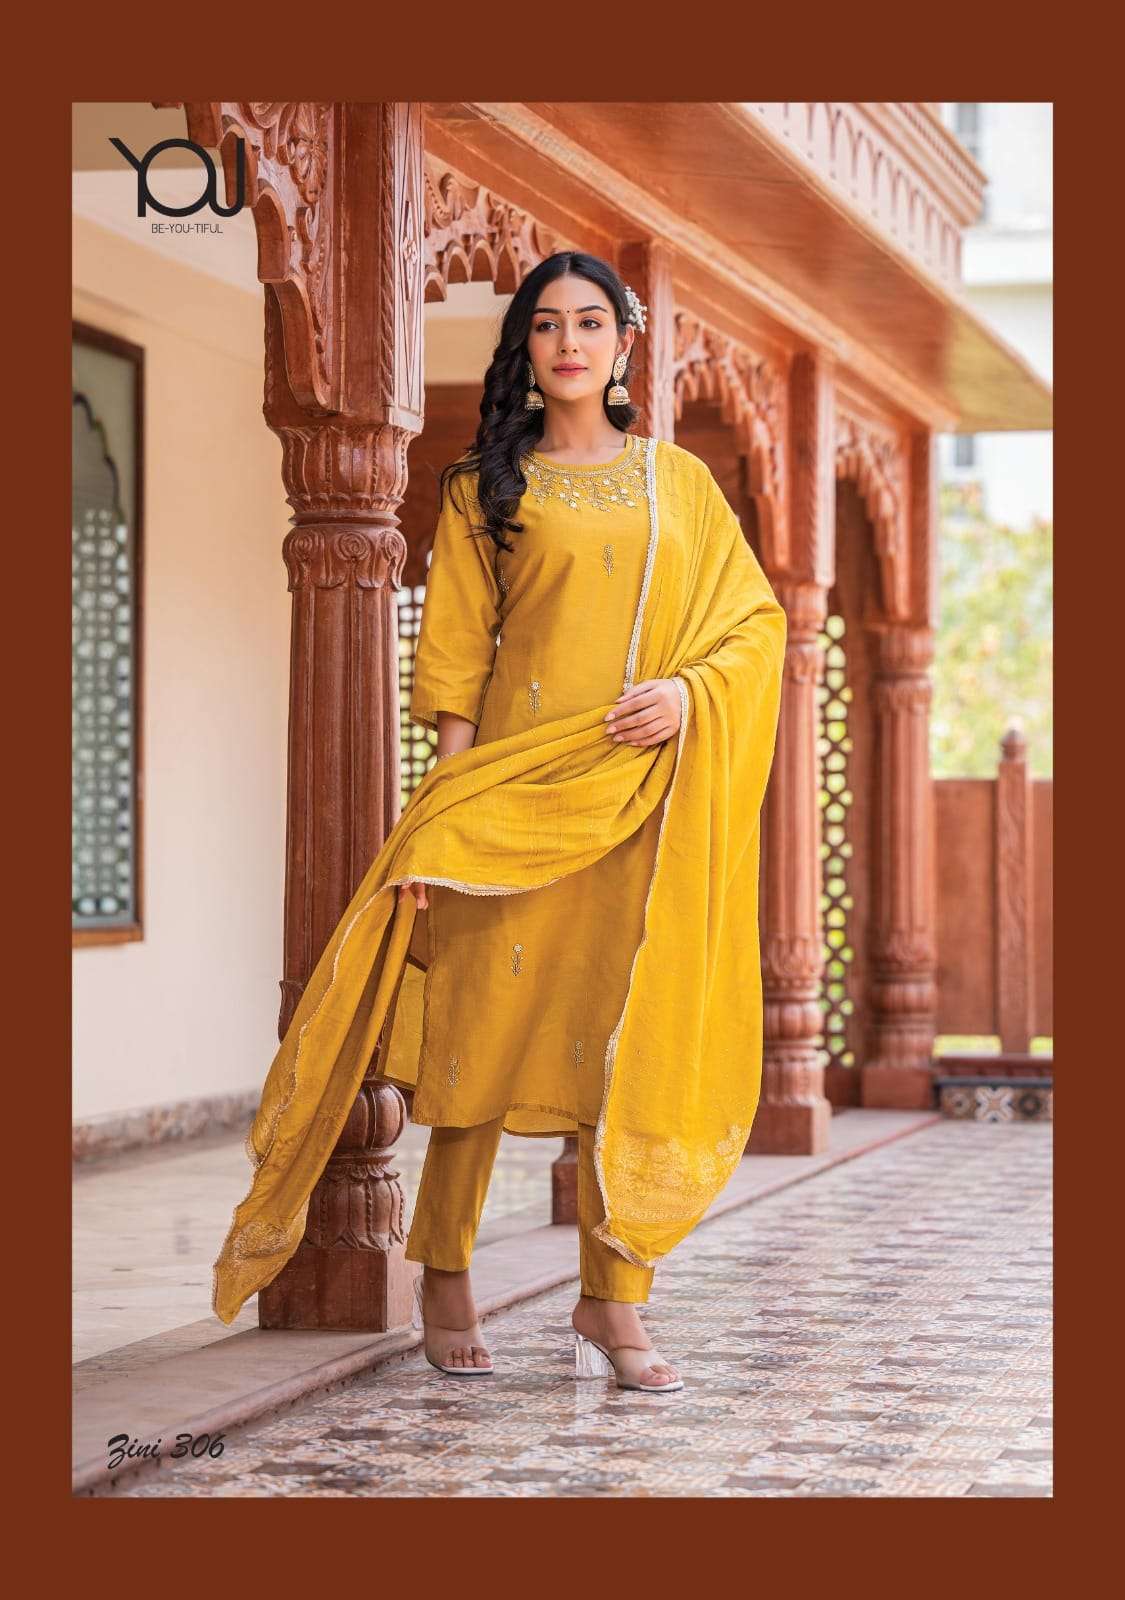 Zini Vol-3 By You 301 To 306 Series Beautiful Winter Collection Suits Stylish Fancy Colorful Casual Wear & Ethnic Wear Silk Chanderi Dresses At Wholesale Price